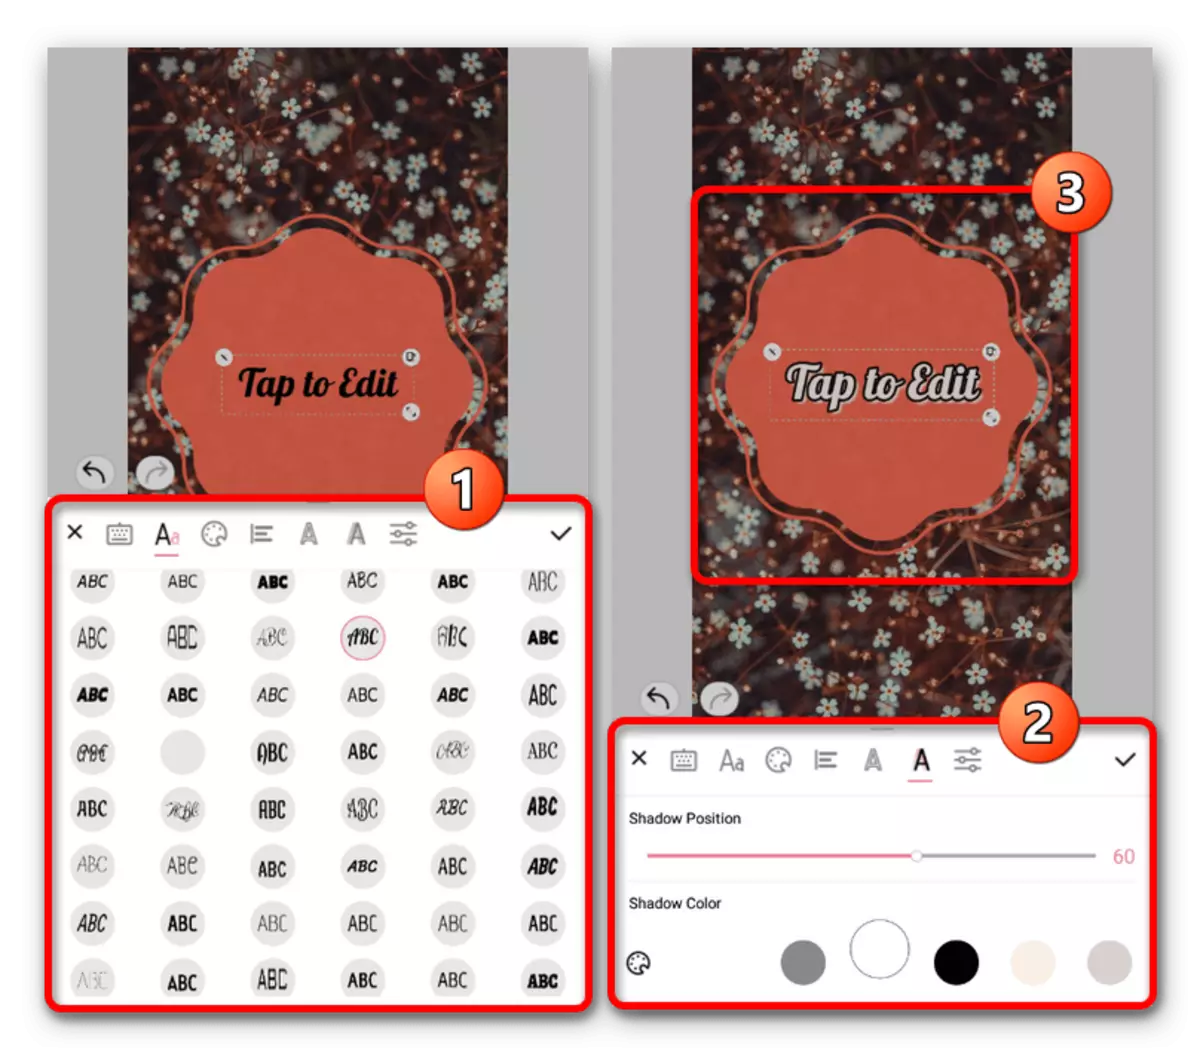 Adding and configuring text to the image in the Highlight Cover Maker application